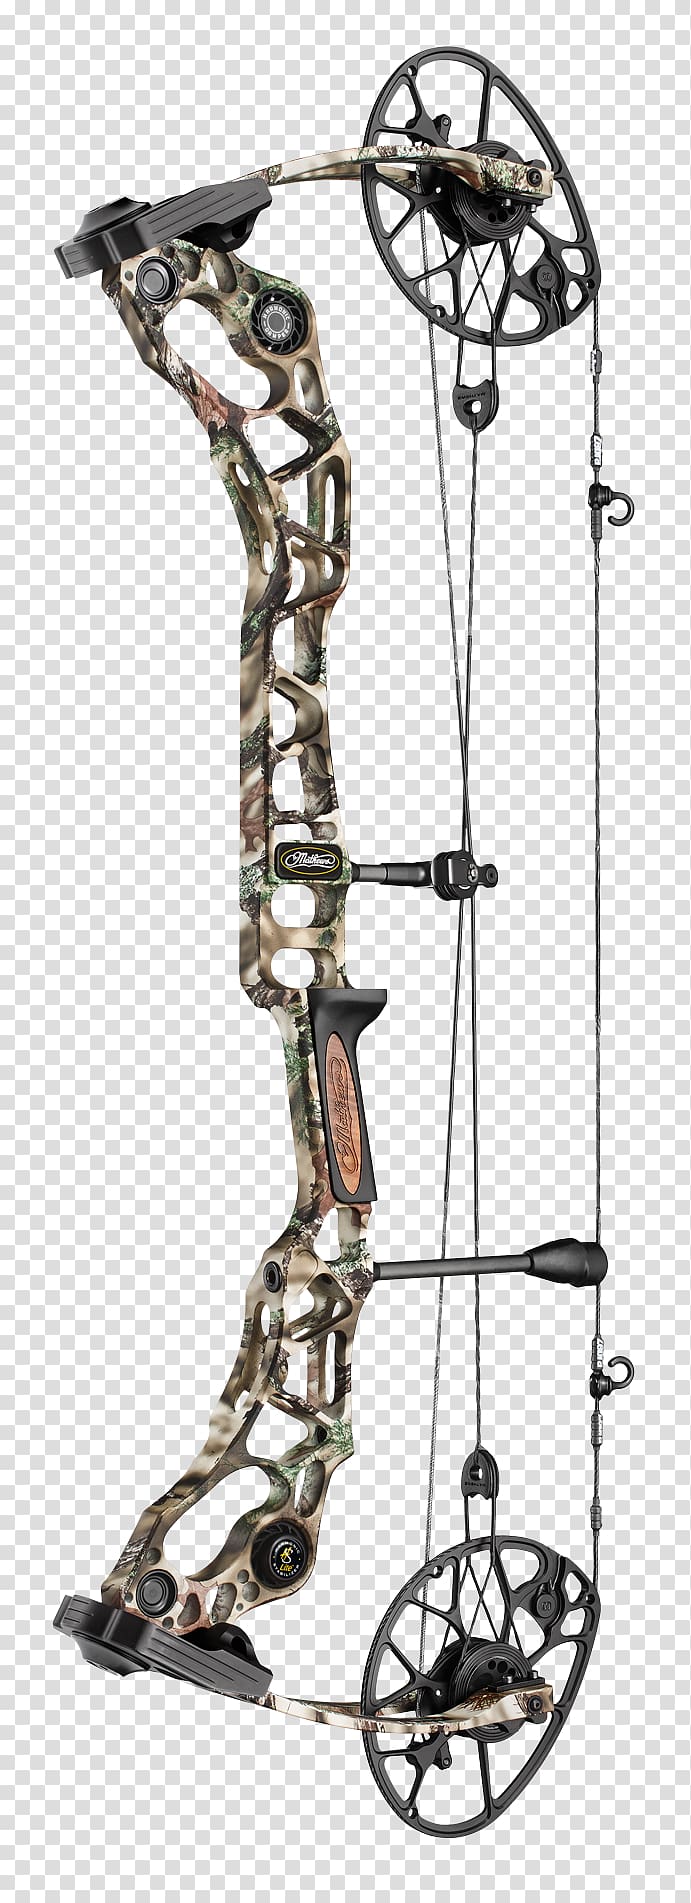 Mathews Archery, Inc. Compound Bows Bow and arrow Hunting, bow arrow transparent background PNG clipart